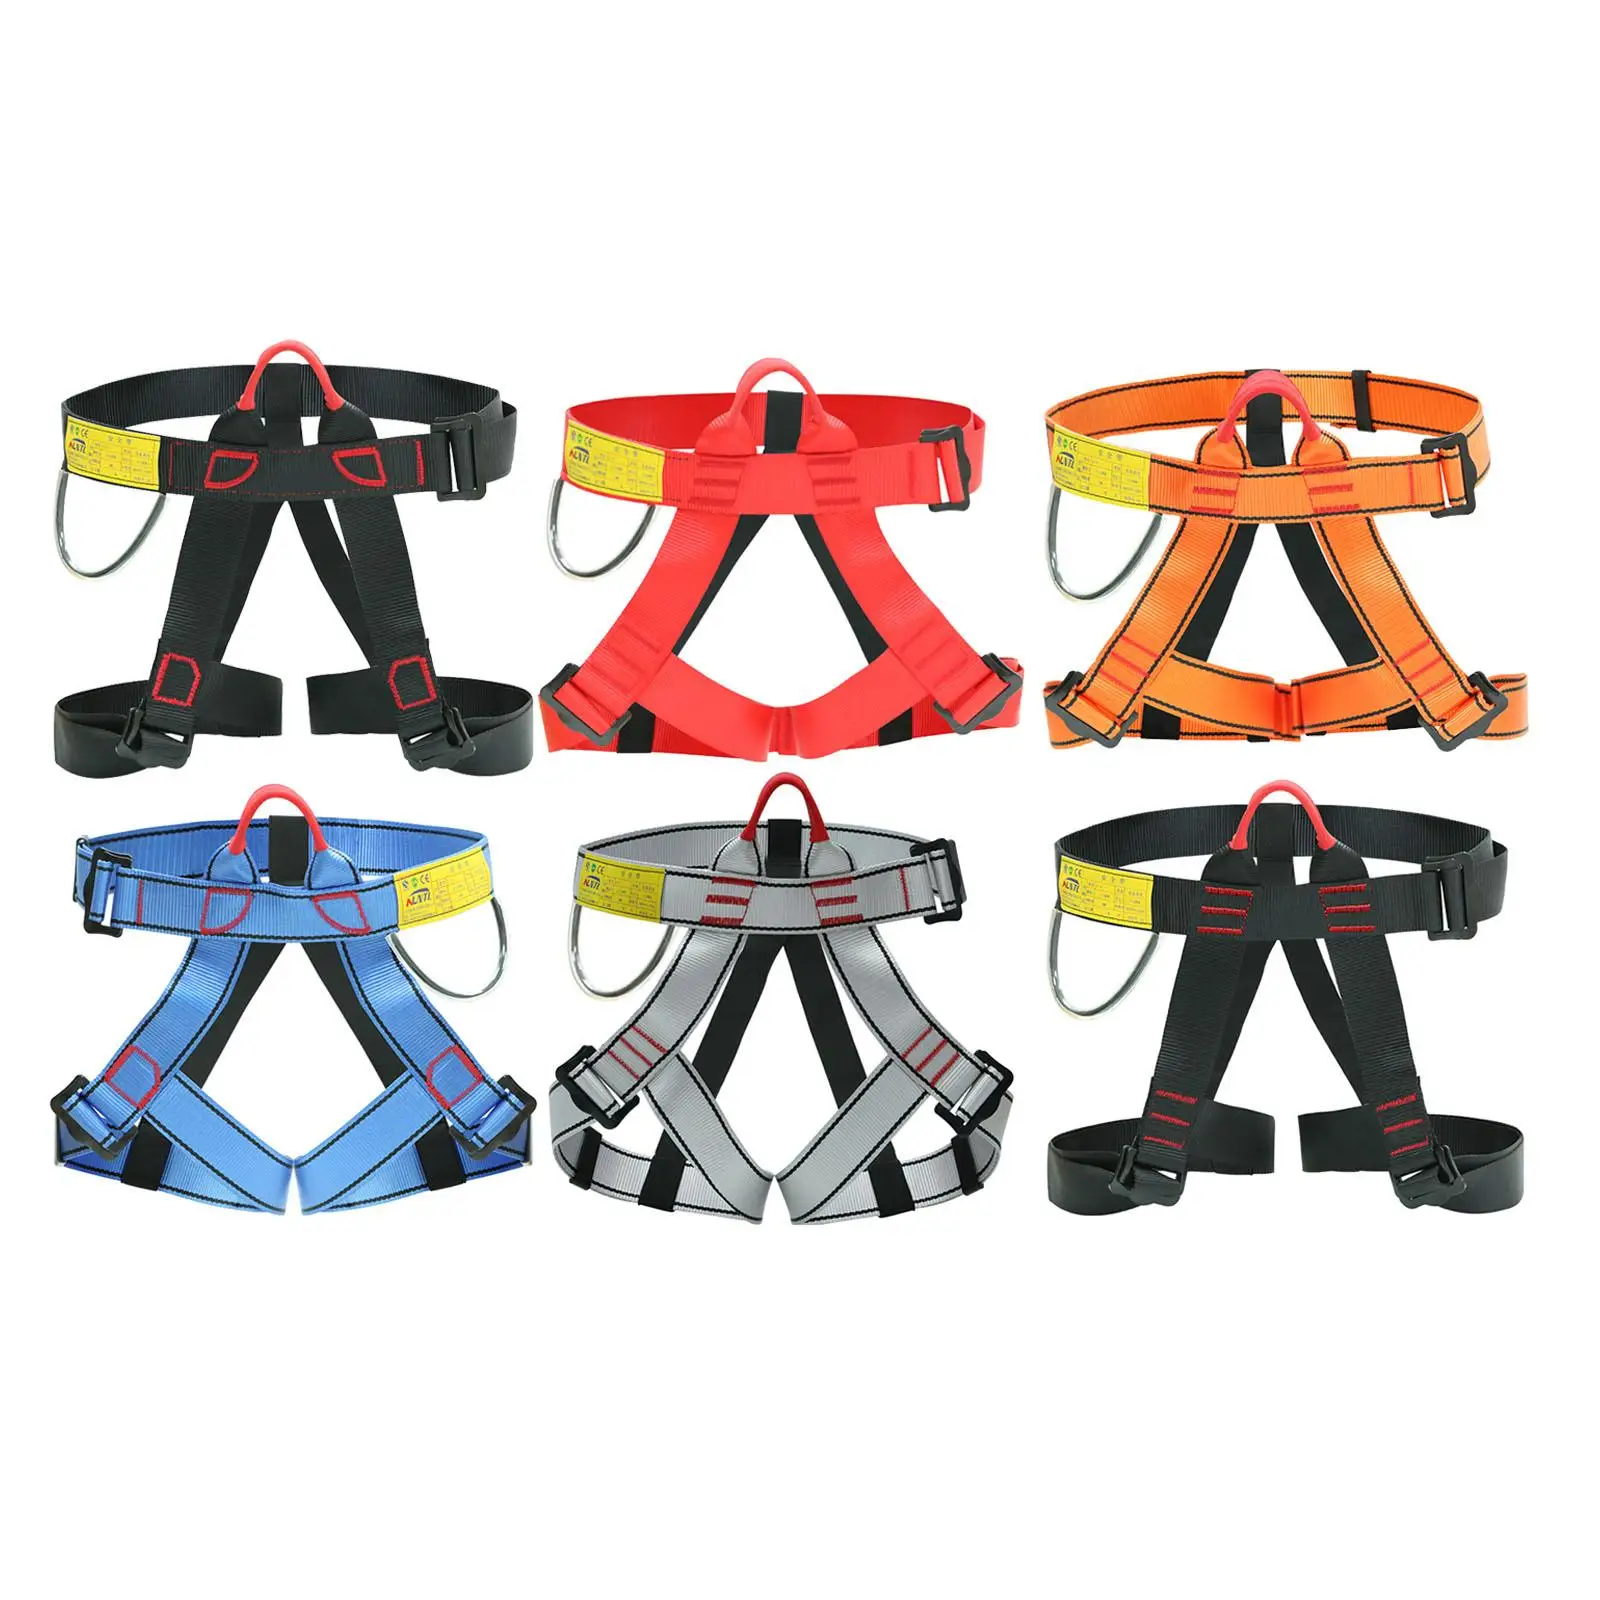 Professional Outdoor Sports Safety Belt Rock Mountain Climbing Harness Half Body Harness for Adults Men Women